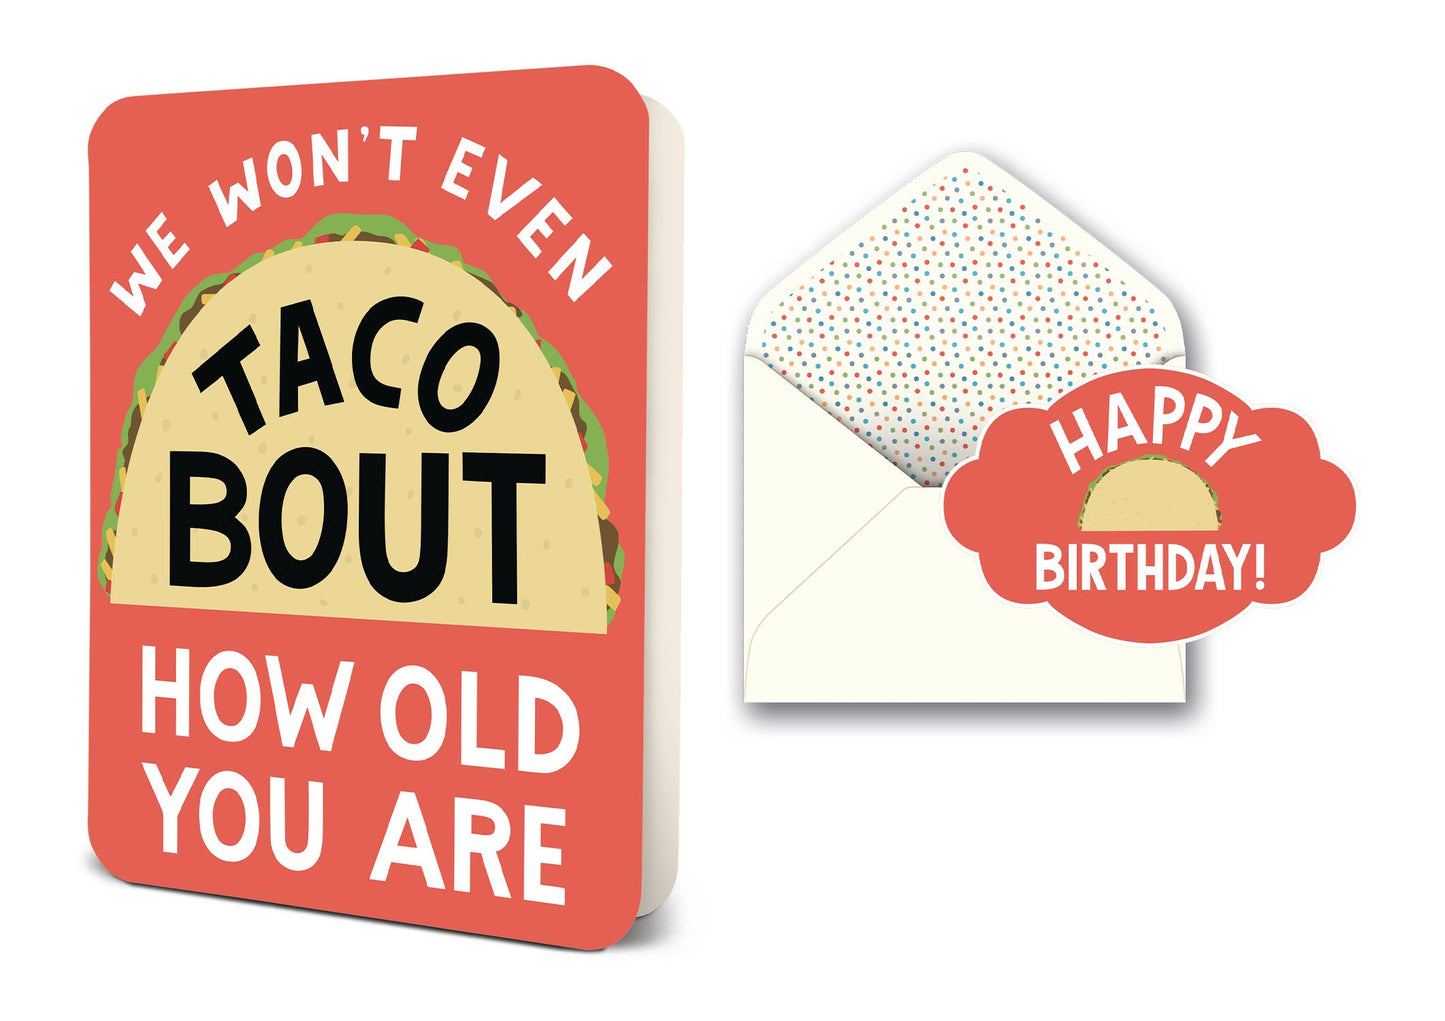 We Won't Even Taco Bout How Old You Are Deluxe Greeting Card